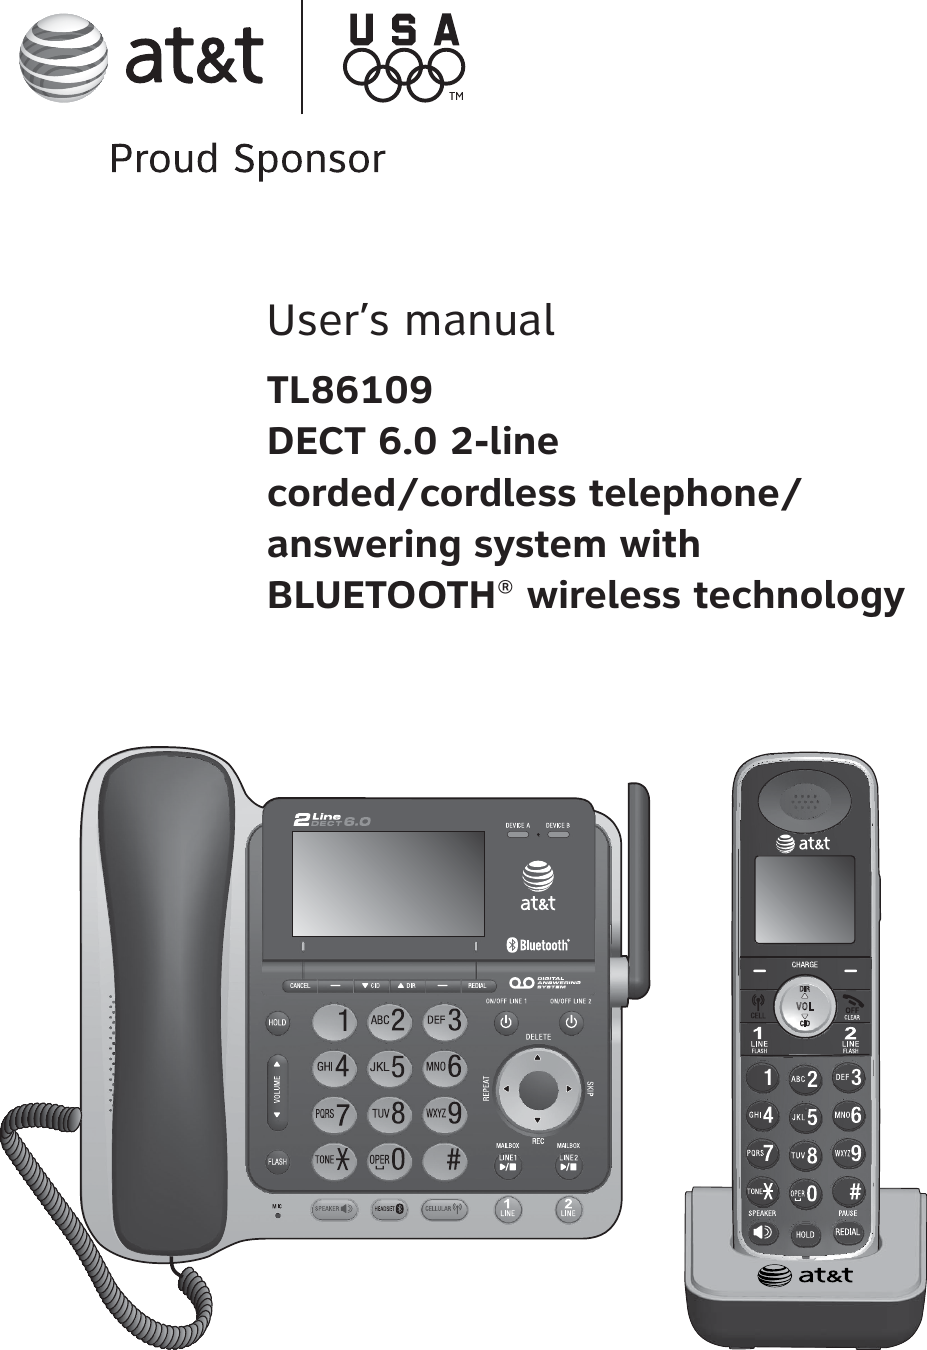 User’s manualTL86109DECT 6.0 2-line corded/cordless telephone/answering system with BLUETOOTH® wireless technology